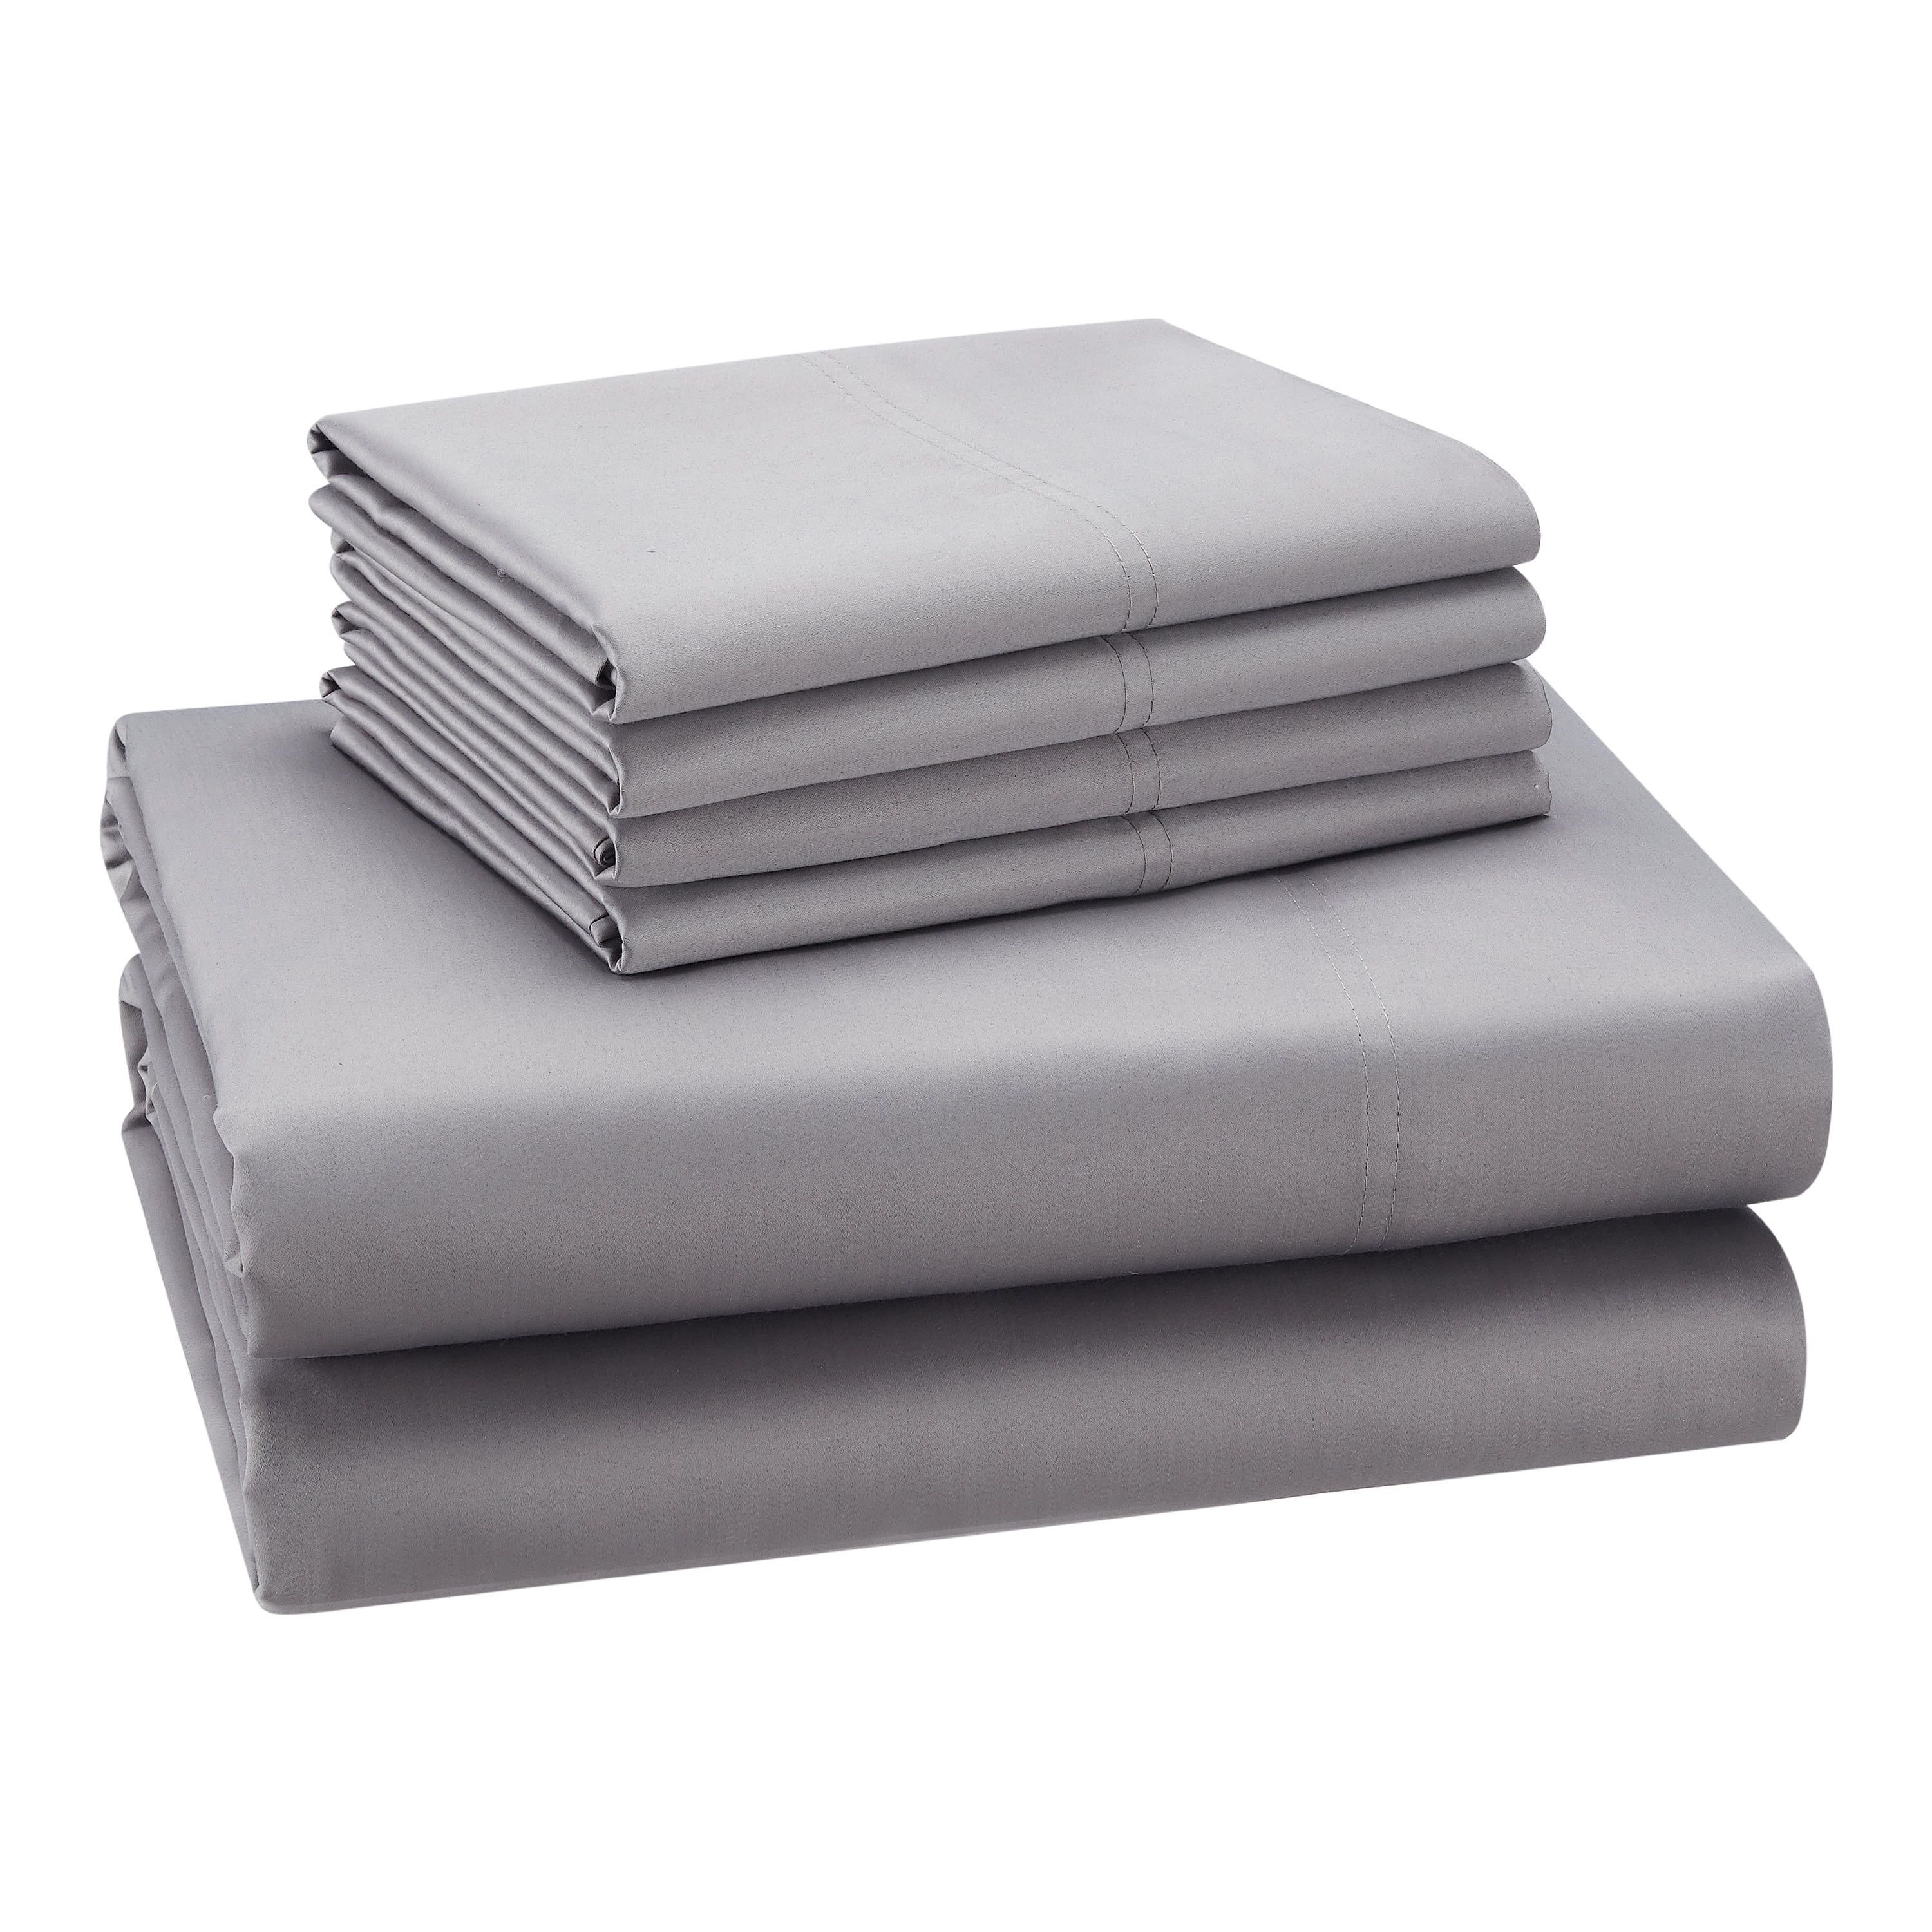 Hotel Style 1200 Thread Count Cotton Rich 6-Piece Sheet Set, Soft Silver Color, King | Walmart (US)